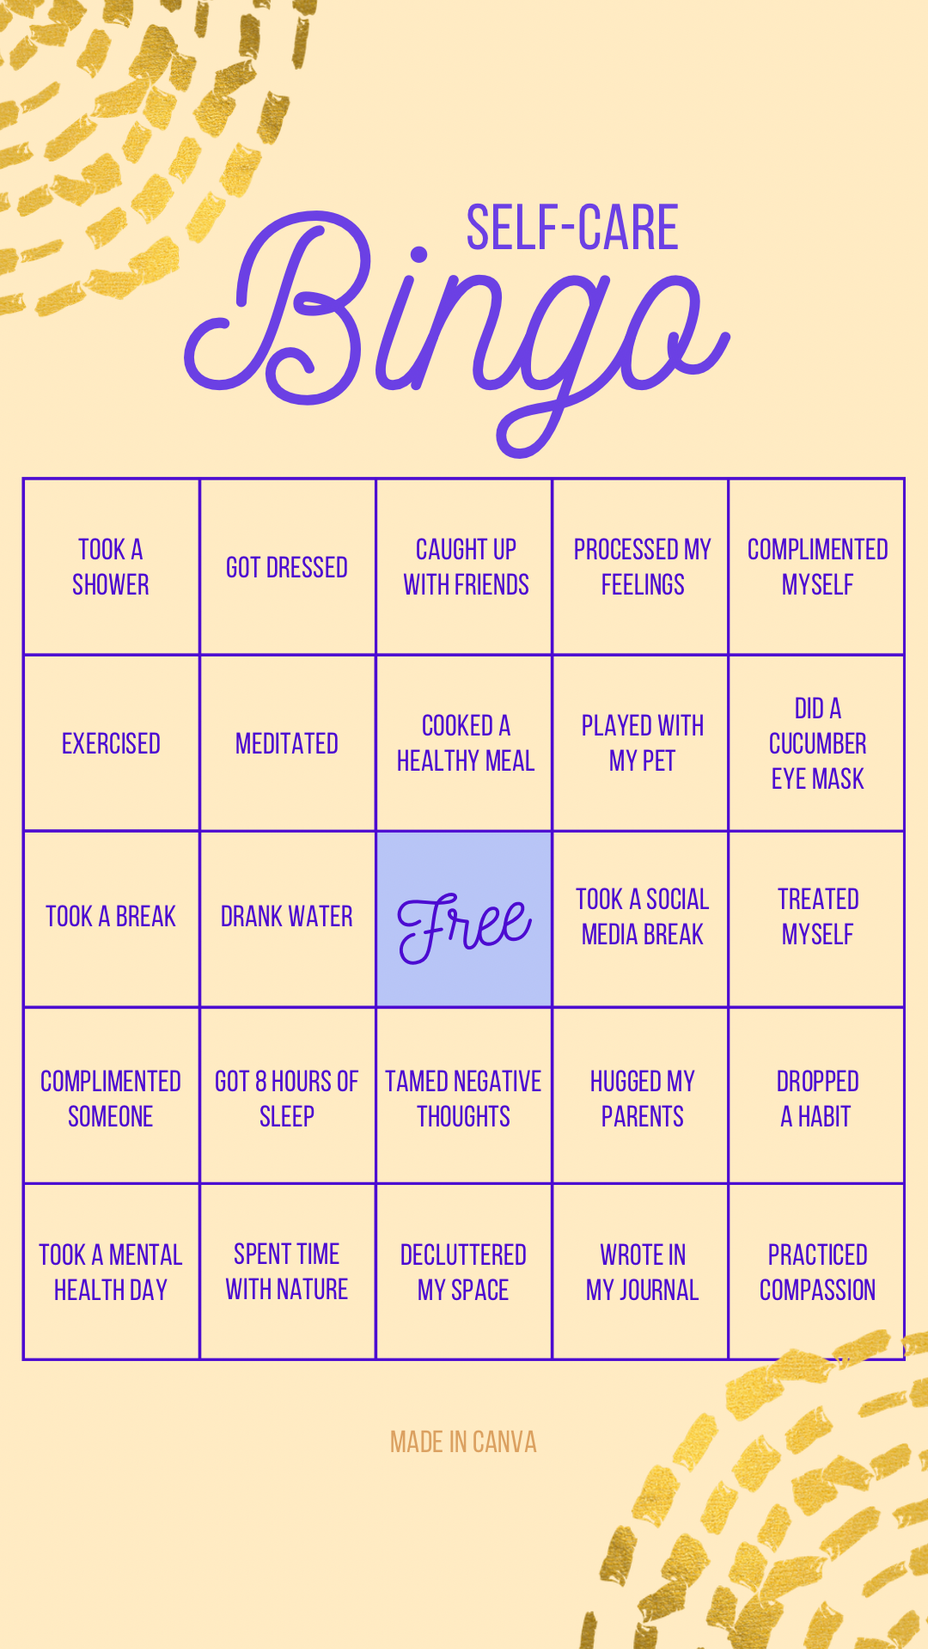 <p>Can you get a Bingo? <a class="tm-topic-link mighty-topic" title="Distract Me" href="/topic/distractme/" data-id="5cabee5faf2da400d4e56a41" data-name="Distract Me" aria-label="hashtag Distract Me">#DistractMe</a> </p>